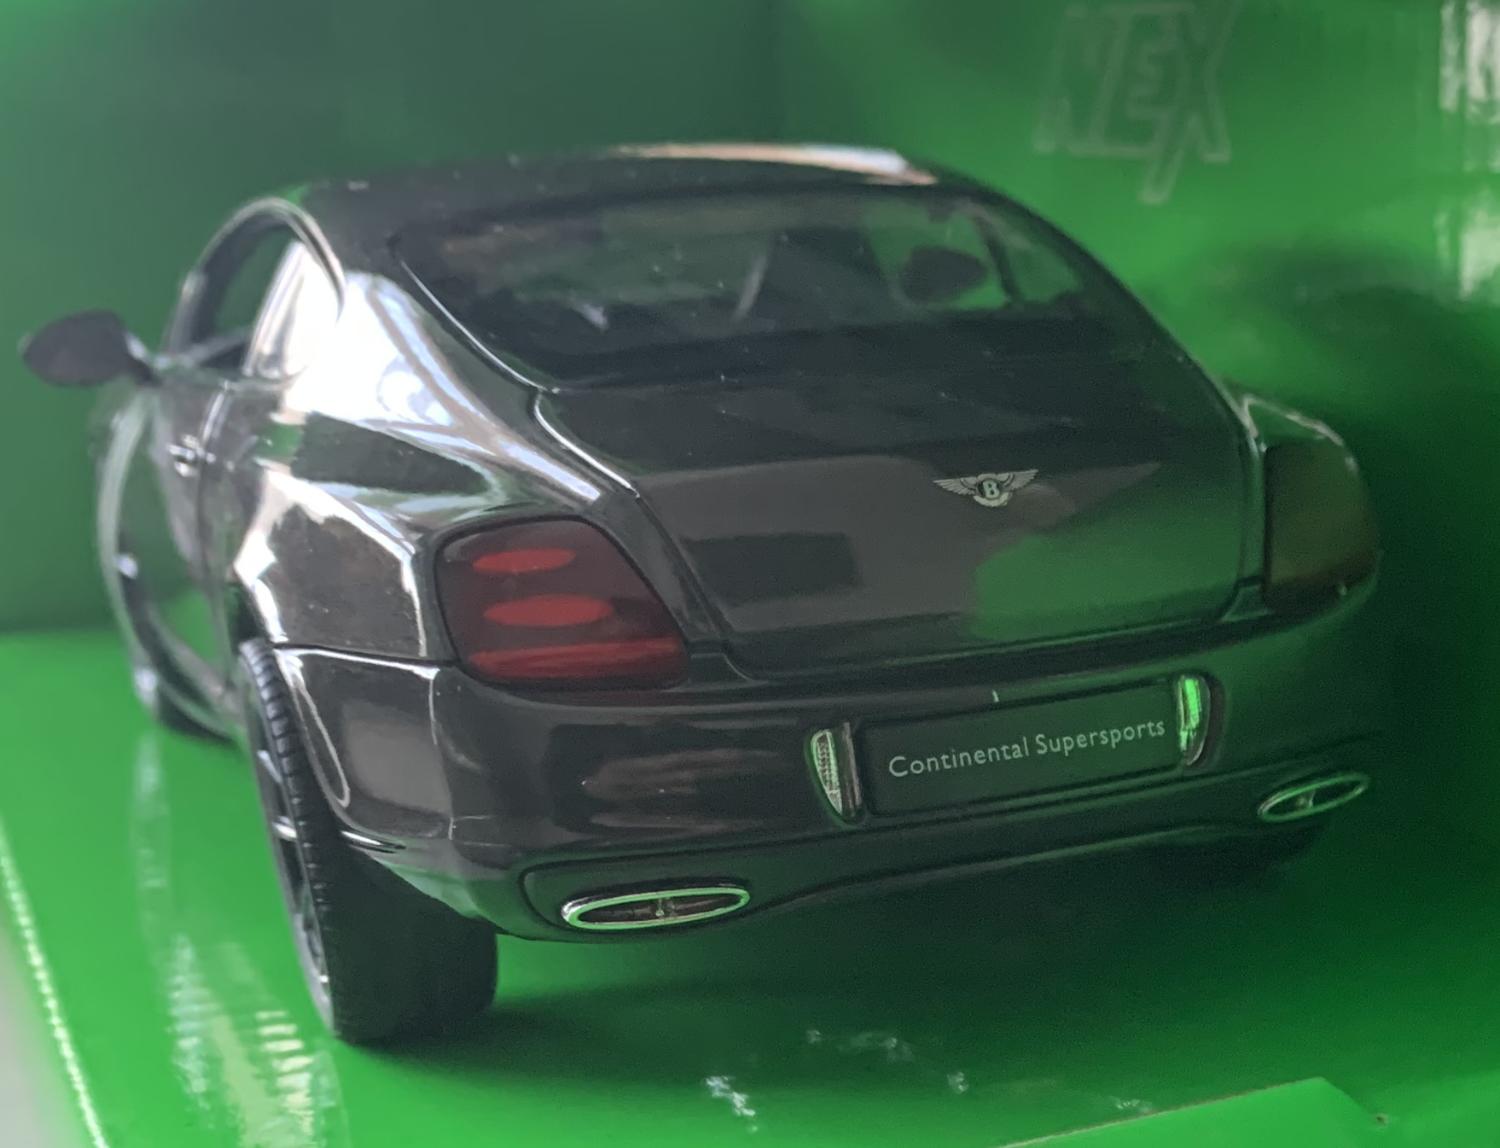 Bentley Continental Supersports in metallic grey 1:24 scale model from Welly